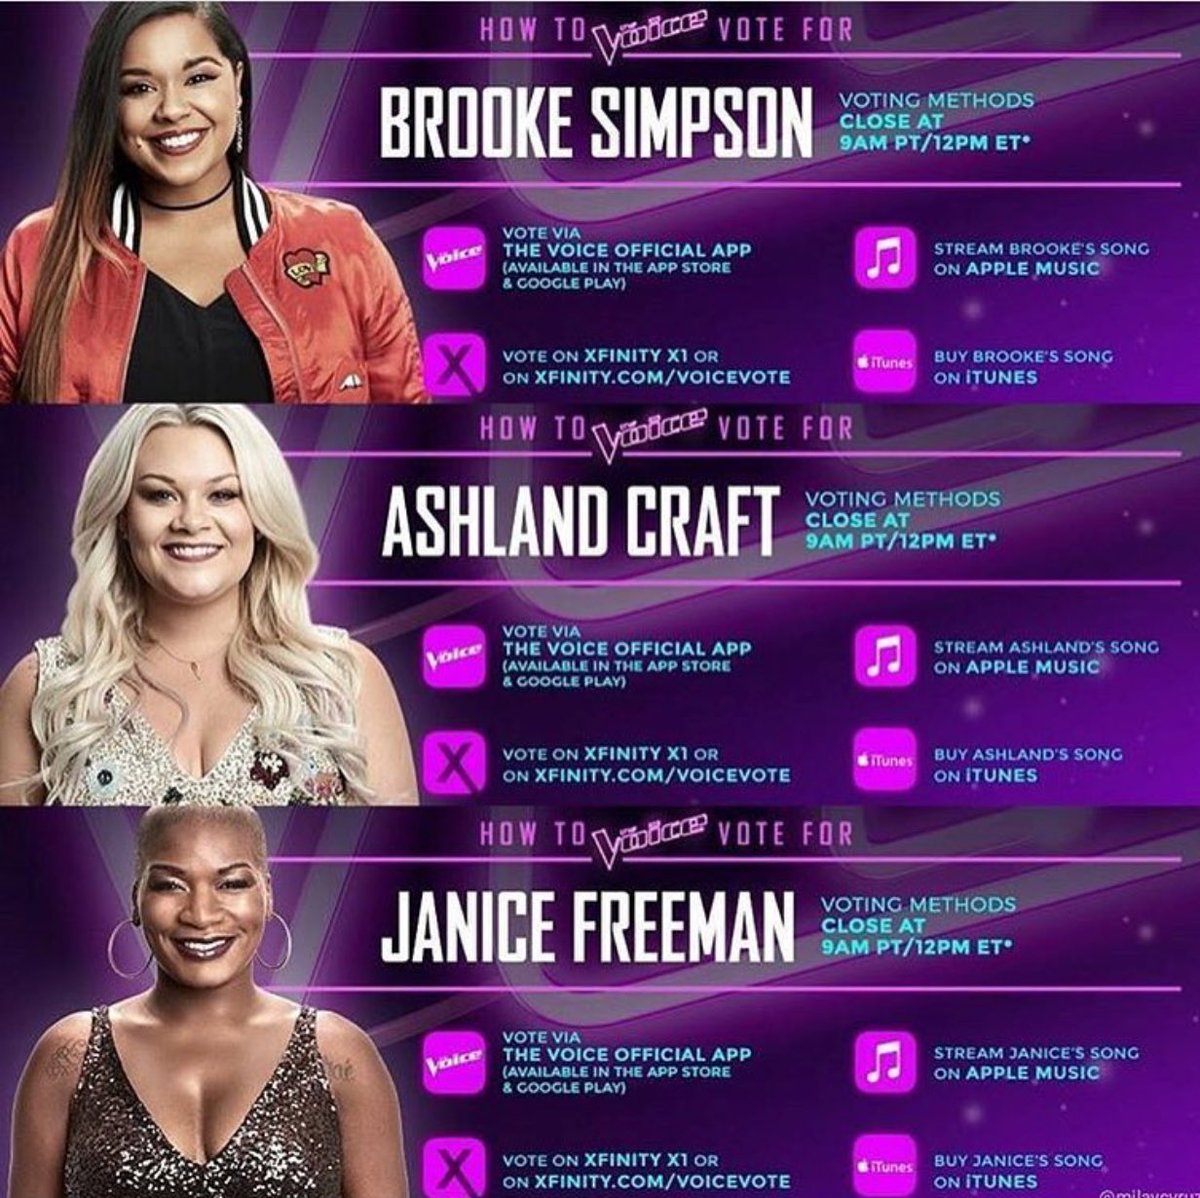 Don't forget to vote for #TeamMiley @janice_freeman @ashlandcraft @brookesimpson https://t.co/2rCxZvGRzd